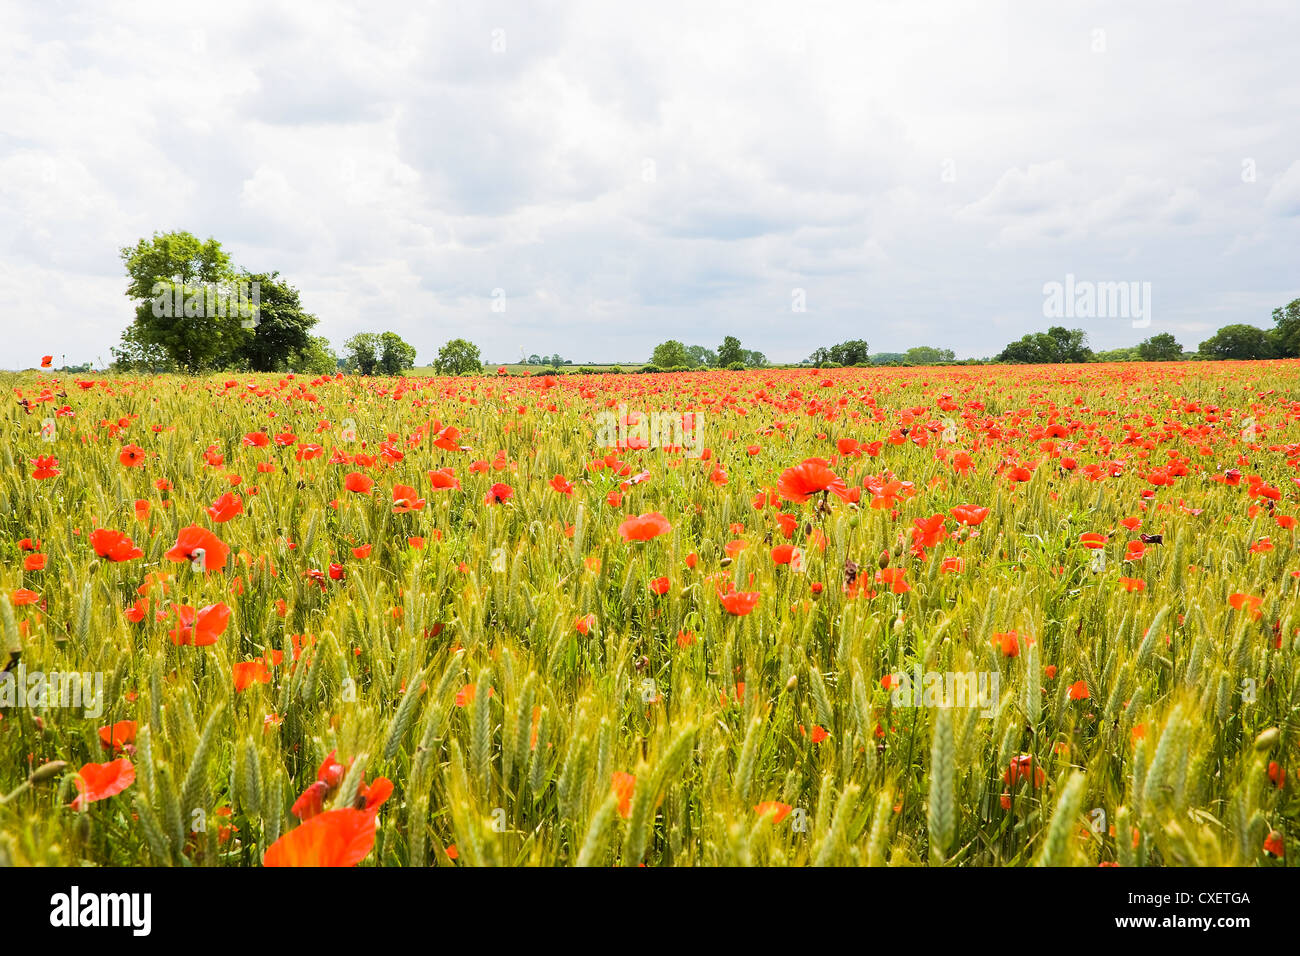 Poppies in an English wheatfield Stock Photo